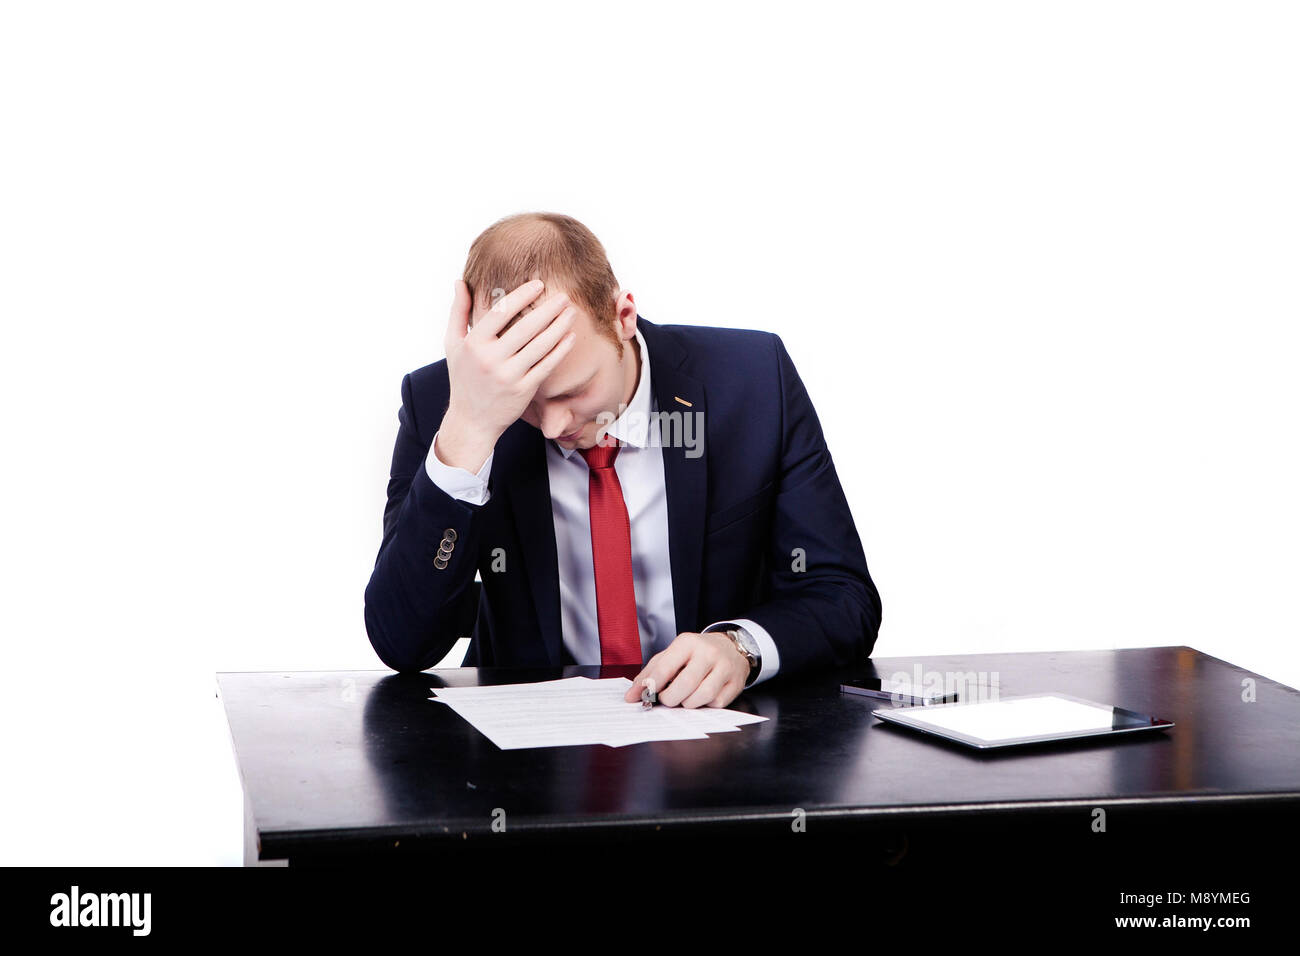 Sad engineer, reads a contract, looks at documents, putting his right hand to his head. Stock Photo